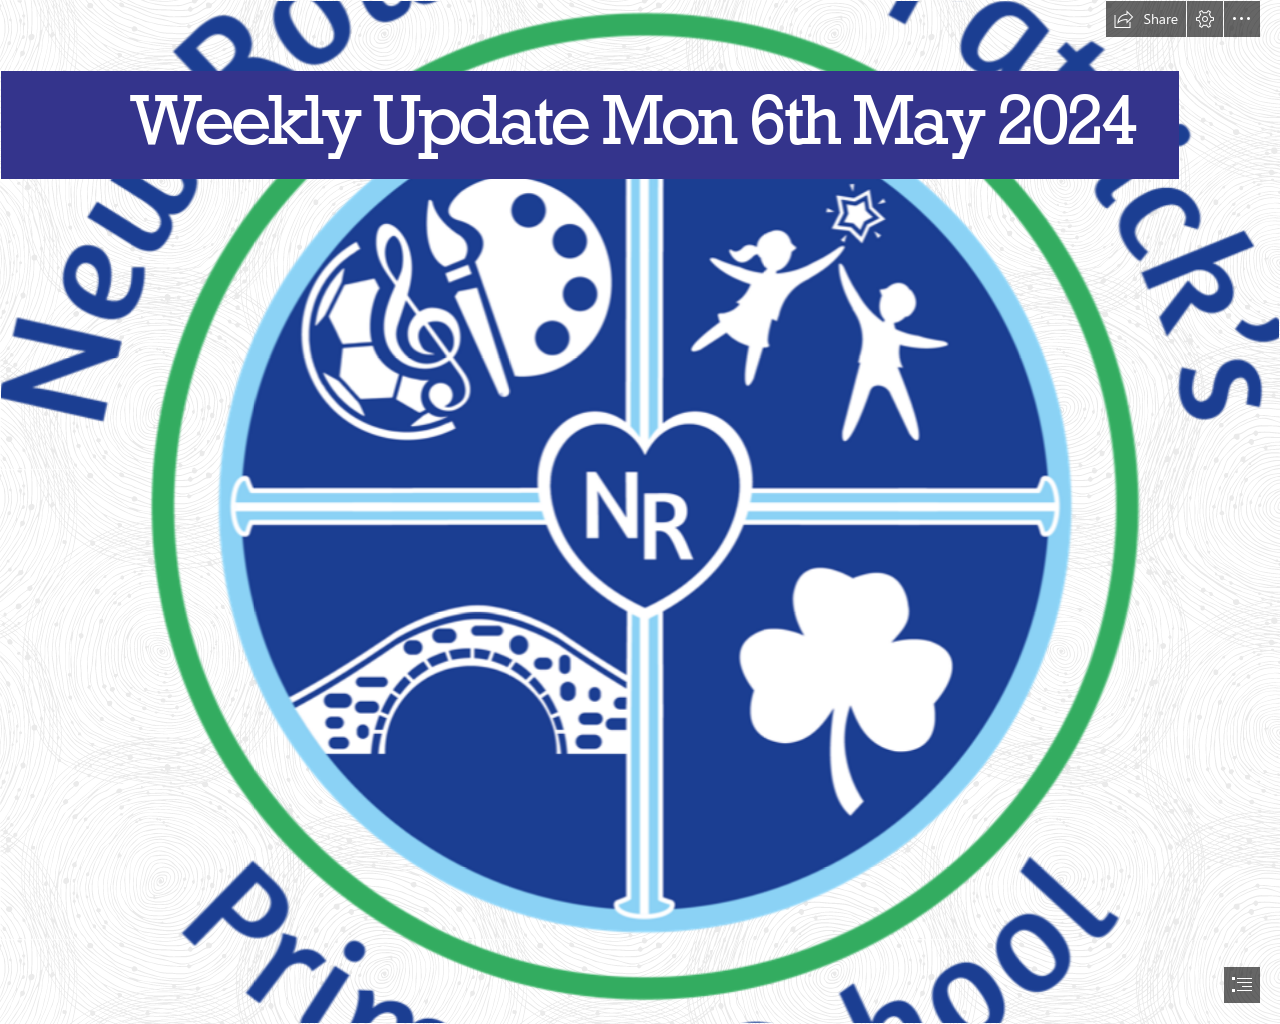 Weekly Update Monday 6th May 2024